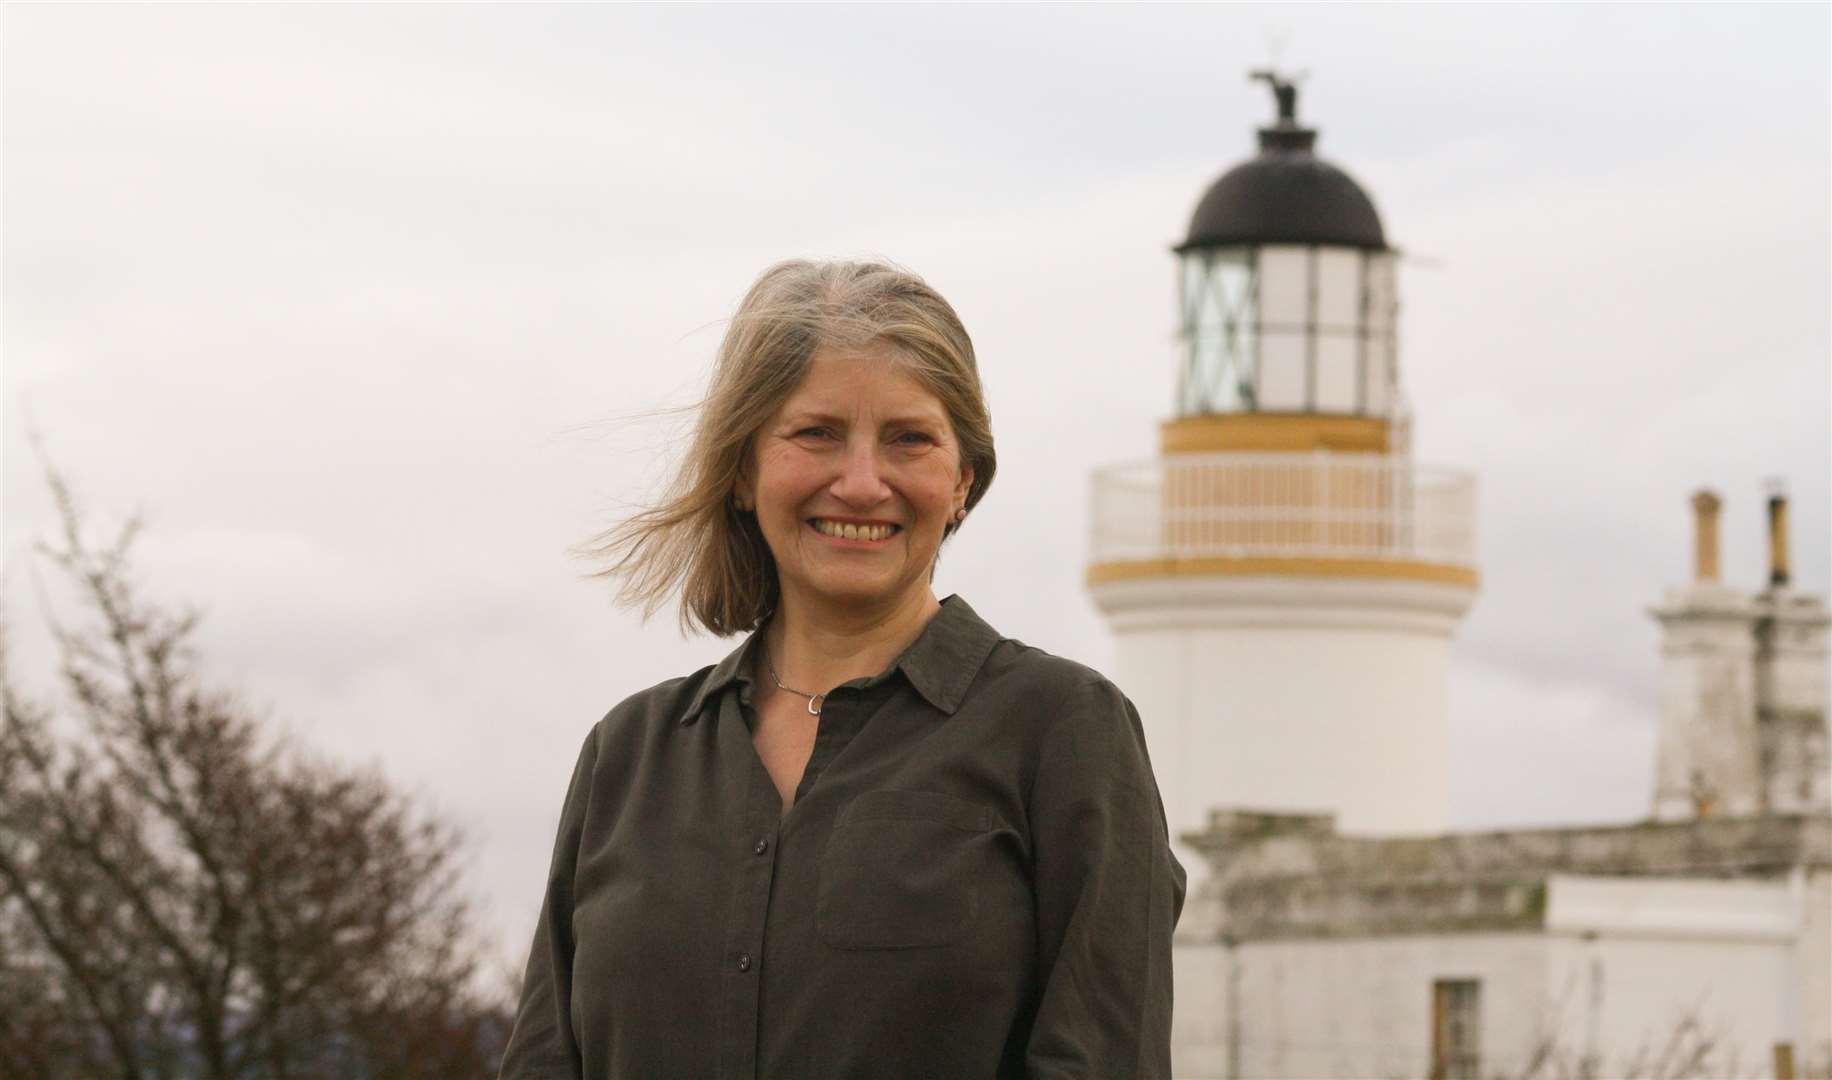 Newly elected Black Isle councillor Sarah Atkin has had a lifelong passion for education and is now keen to make a real difference serving on key Highland Council committee.